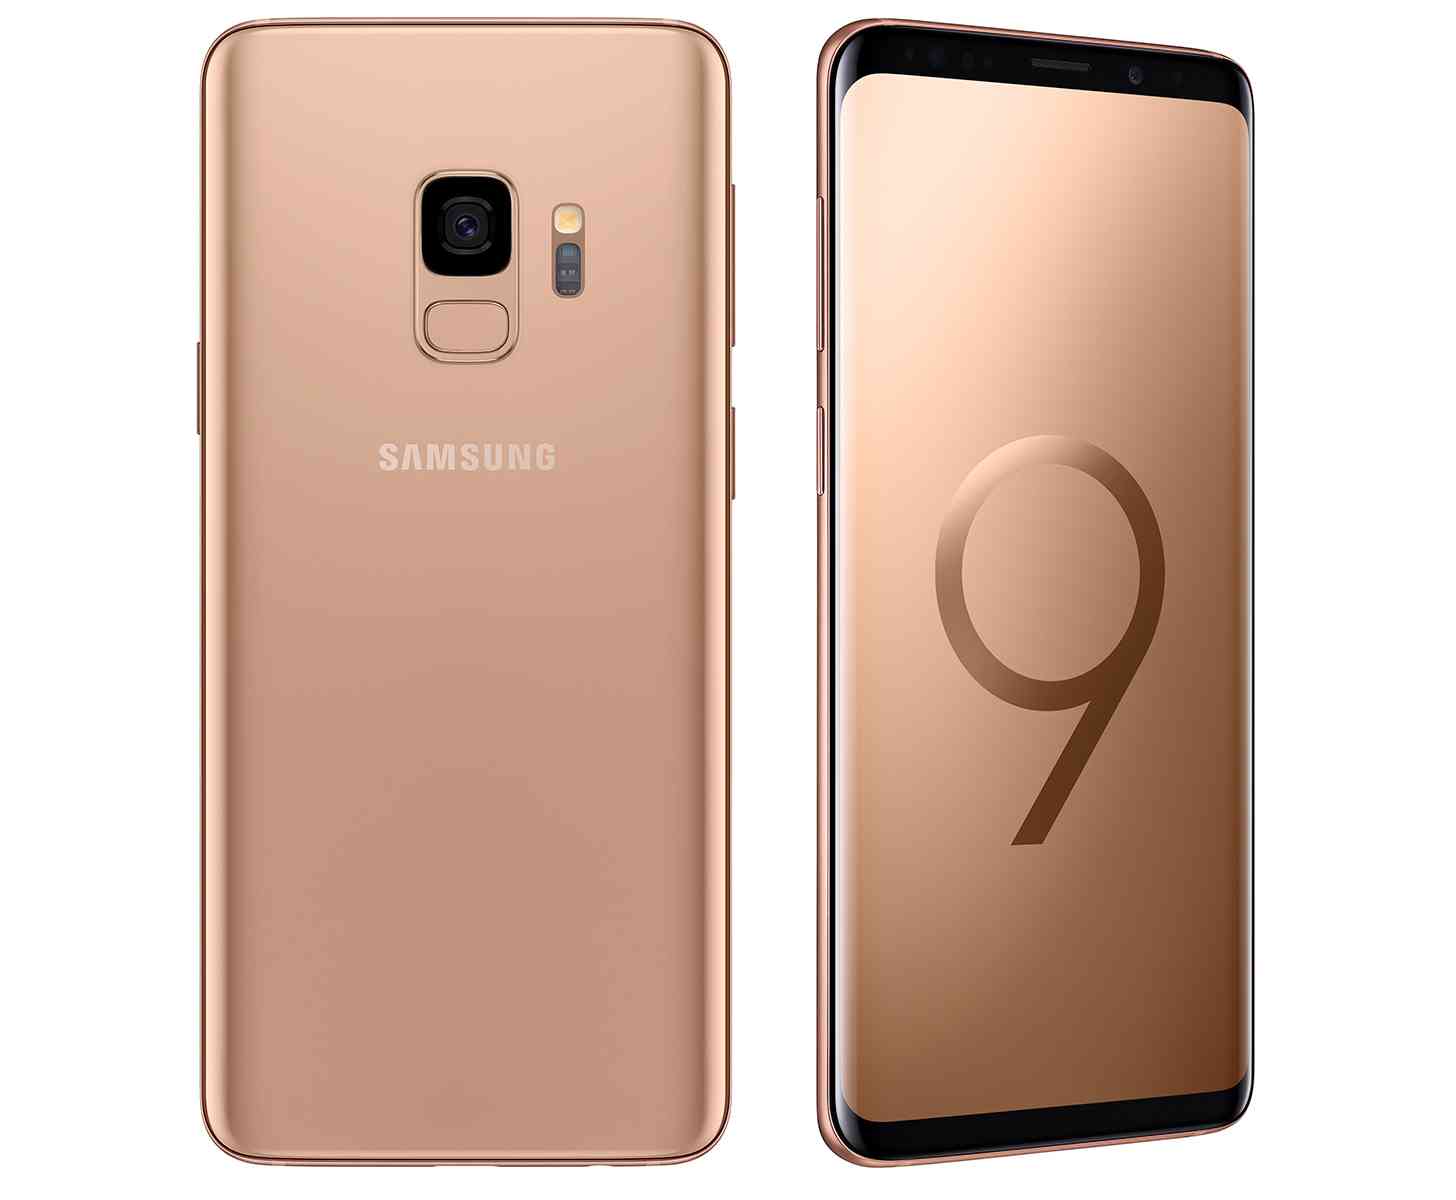 Samsung Galaxy S9 Sunrise Gold official images